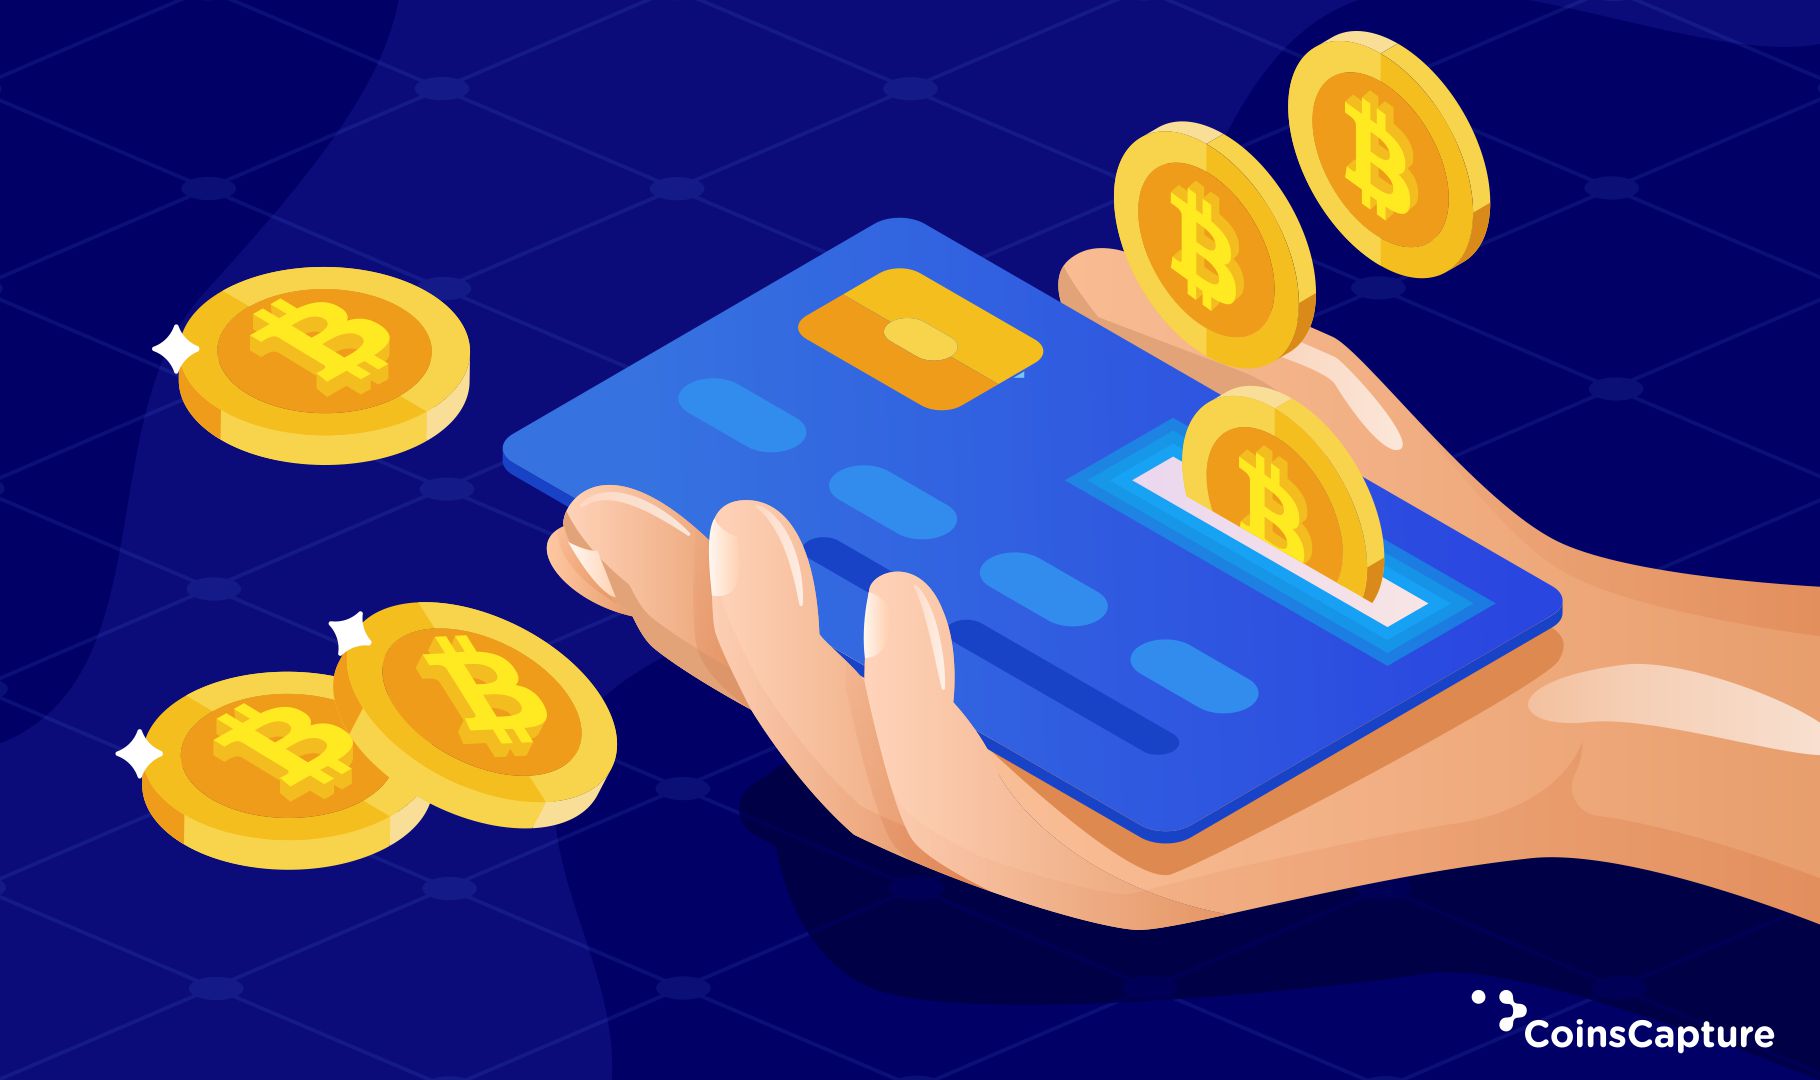 5 Known Crypto Payment Cards in 2020